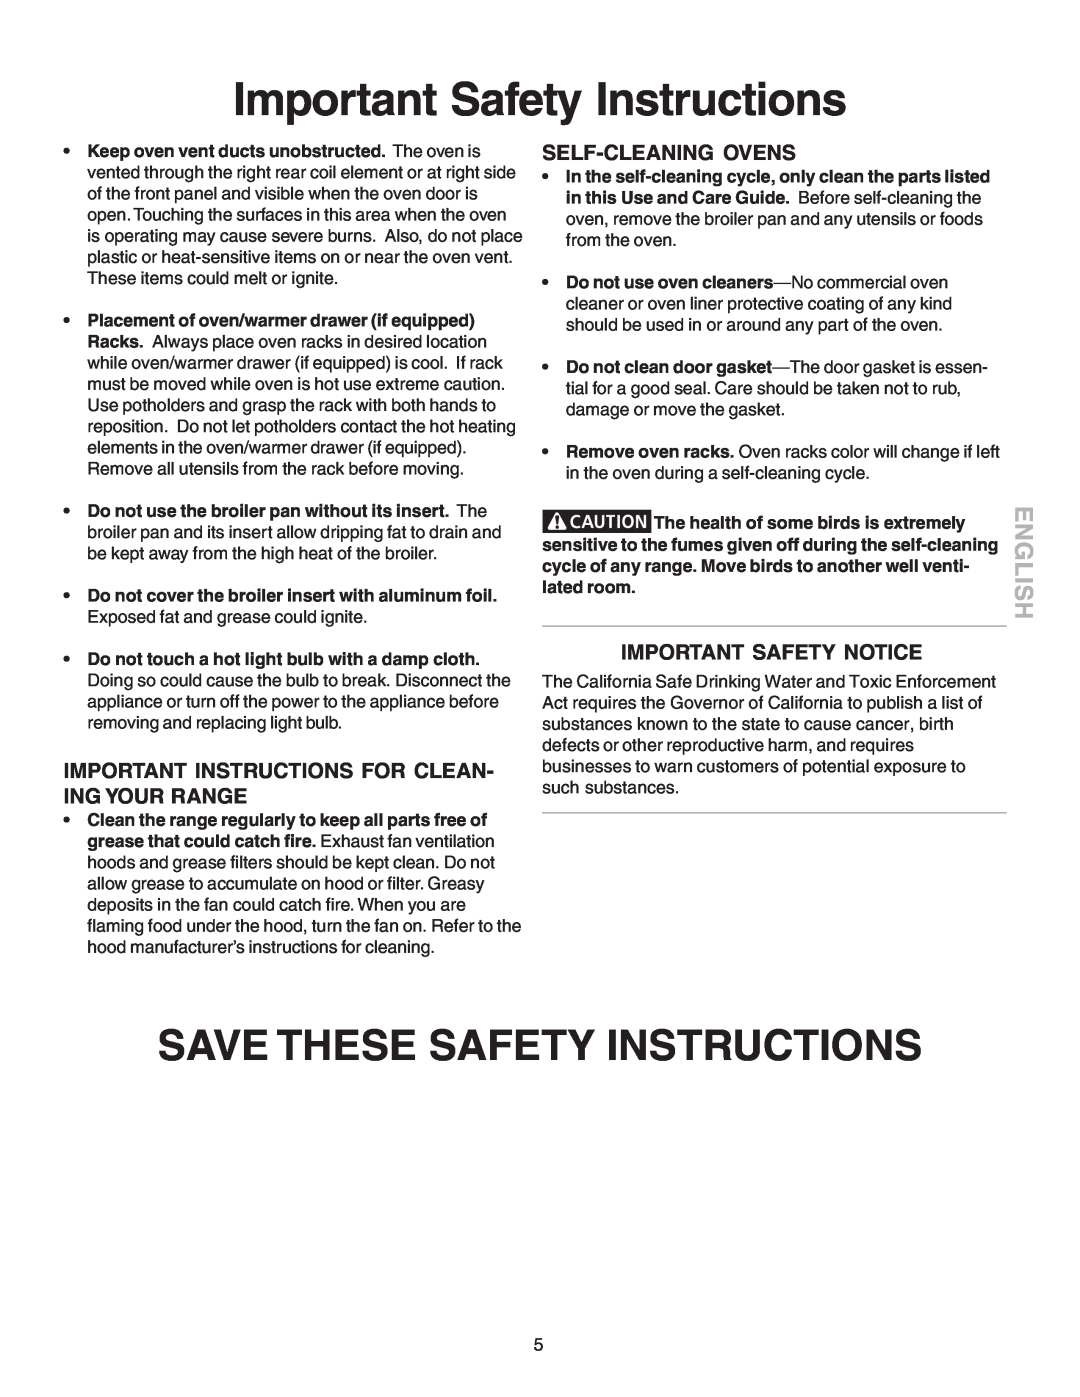 Kenmore 790.4658, 790.4659 Save These Safety Instructions, Important Safety Instructions, English, Self-Cleaning Ovens 